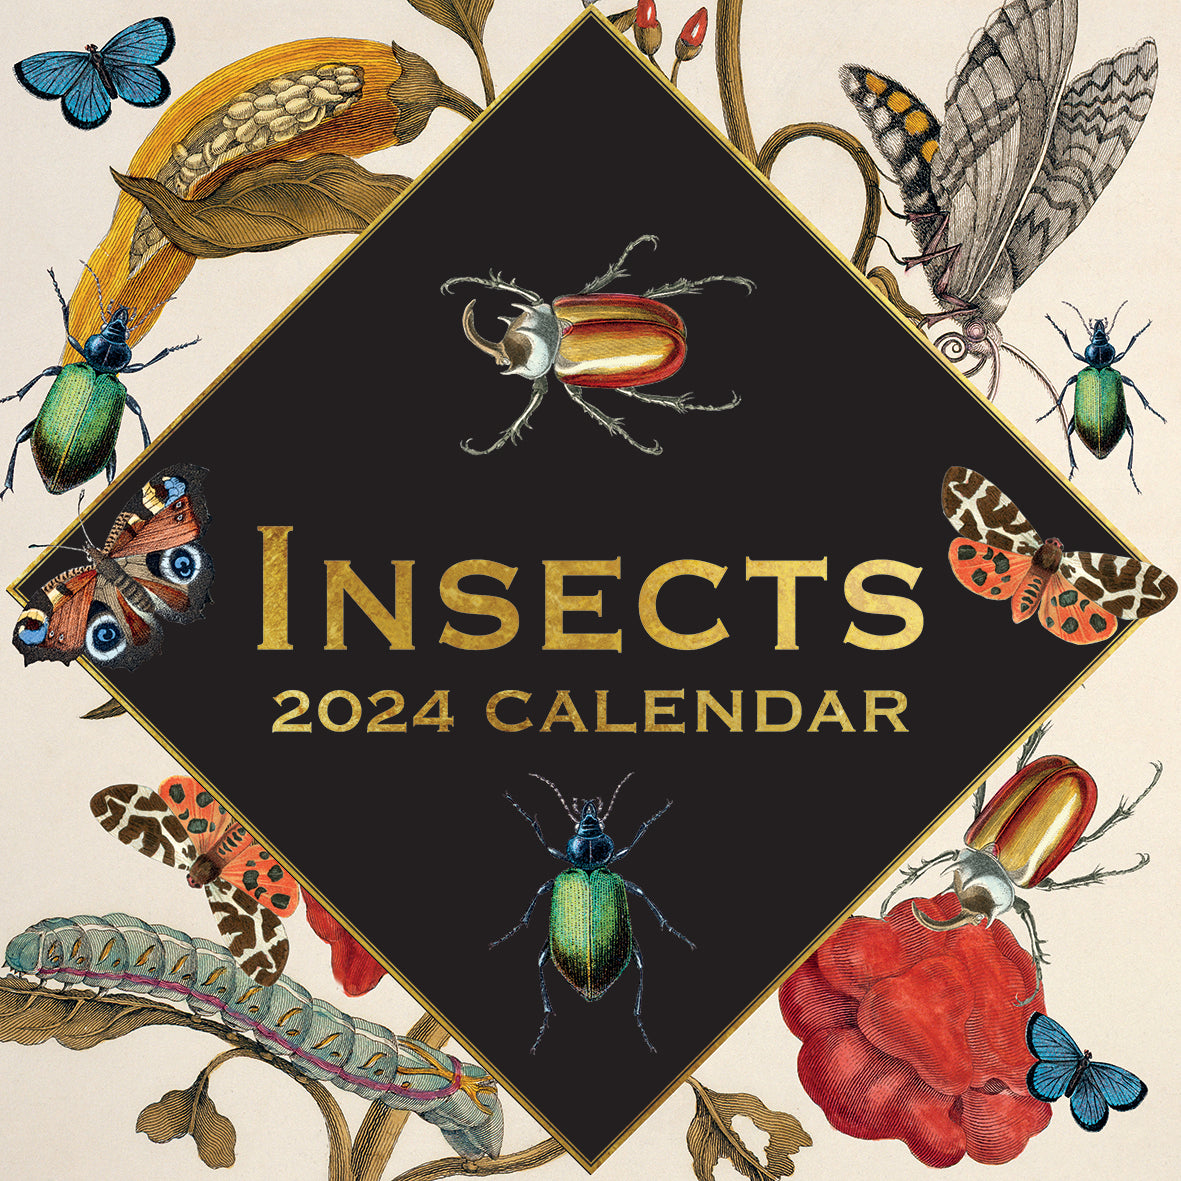 2024 Insects Square Wall Calendar Art Calendars by The Gifted